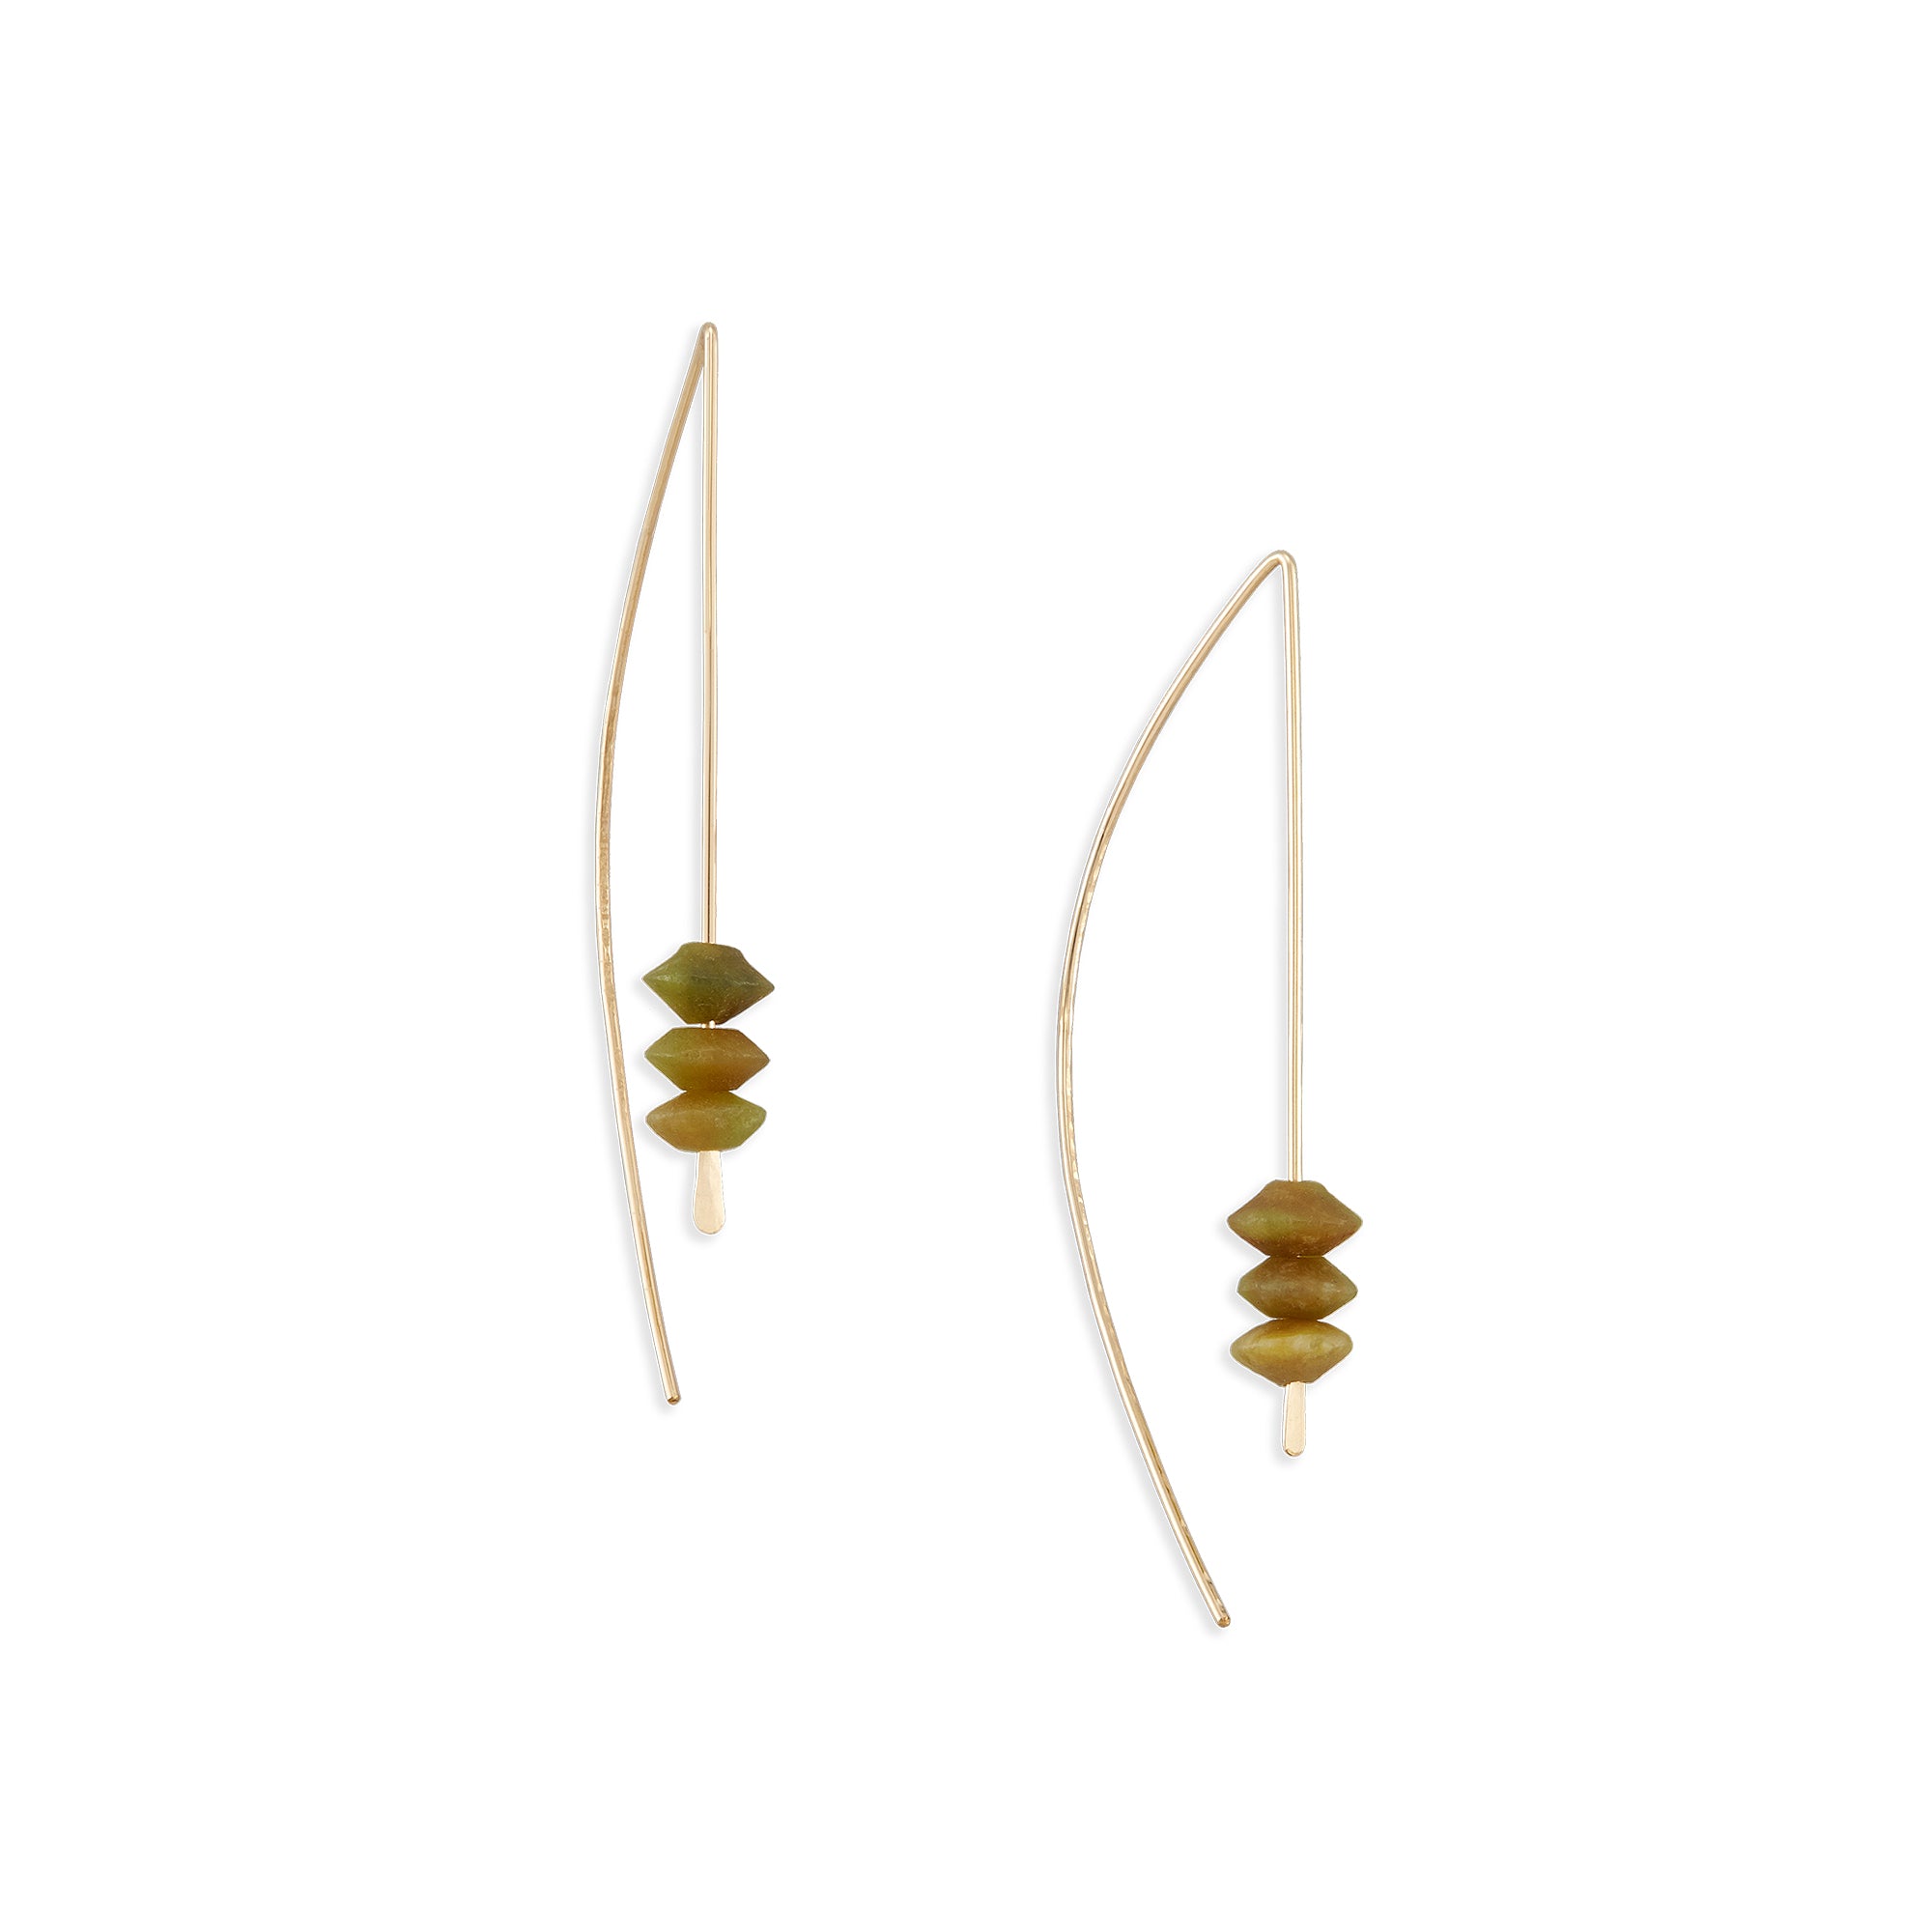 A modern threader earring with a pop of color from semi-precious onyx stones, the arch earring is sure to be a staple